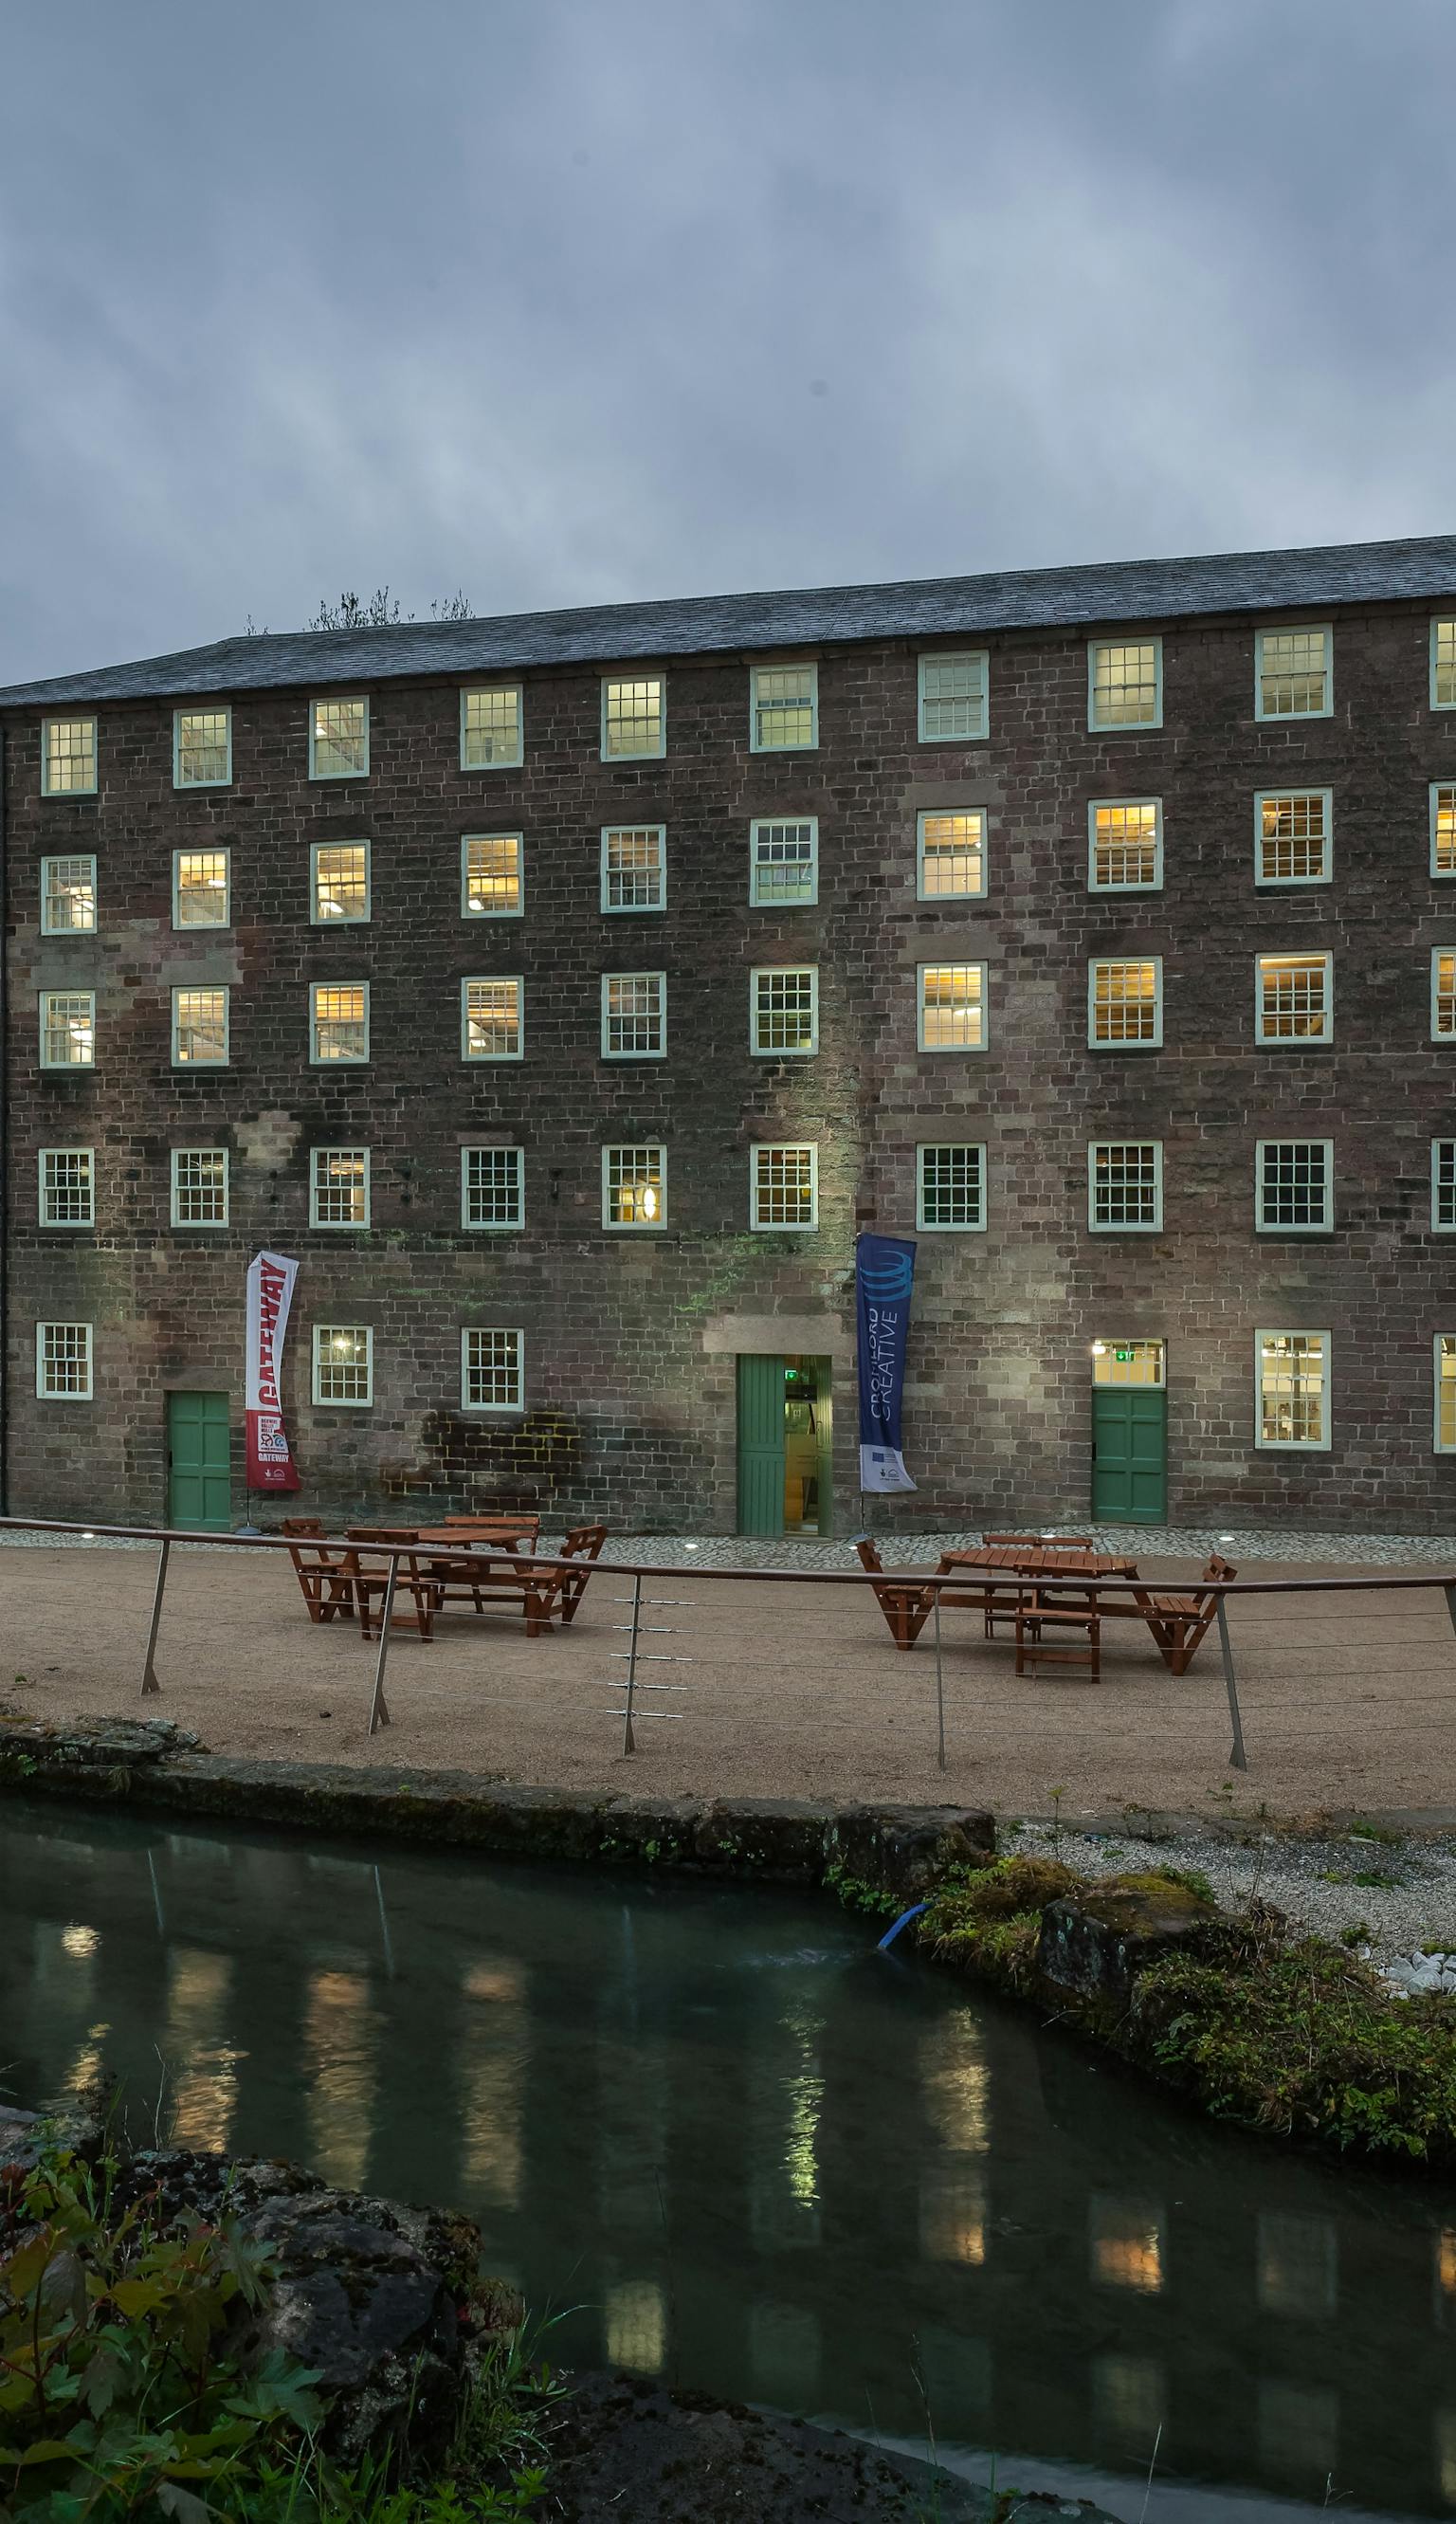 A view of Cromford Mills, a former old-mill in the Derwen Valley Mills Site